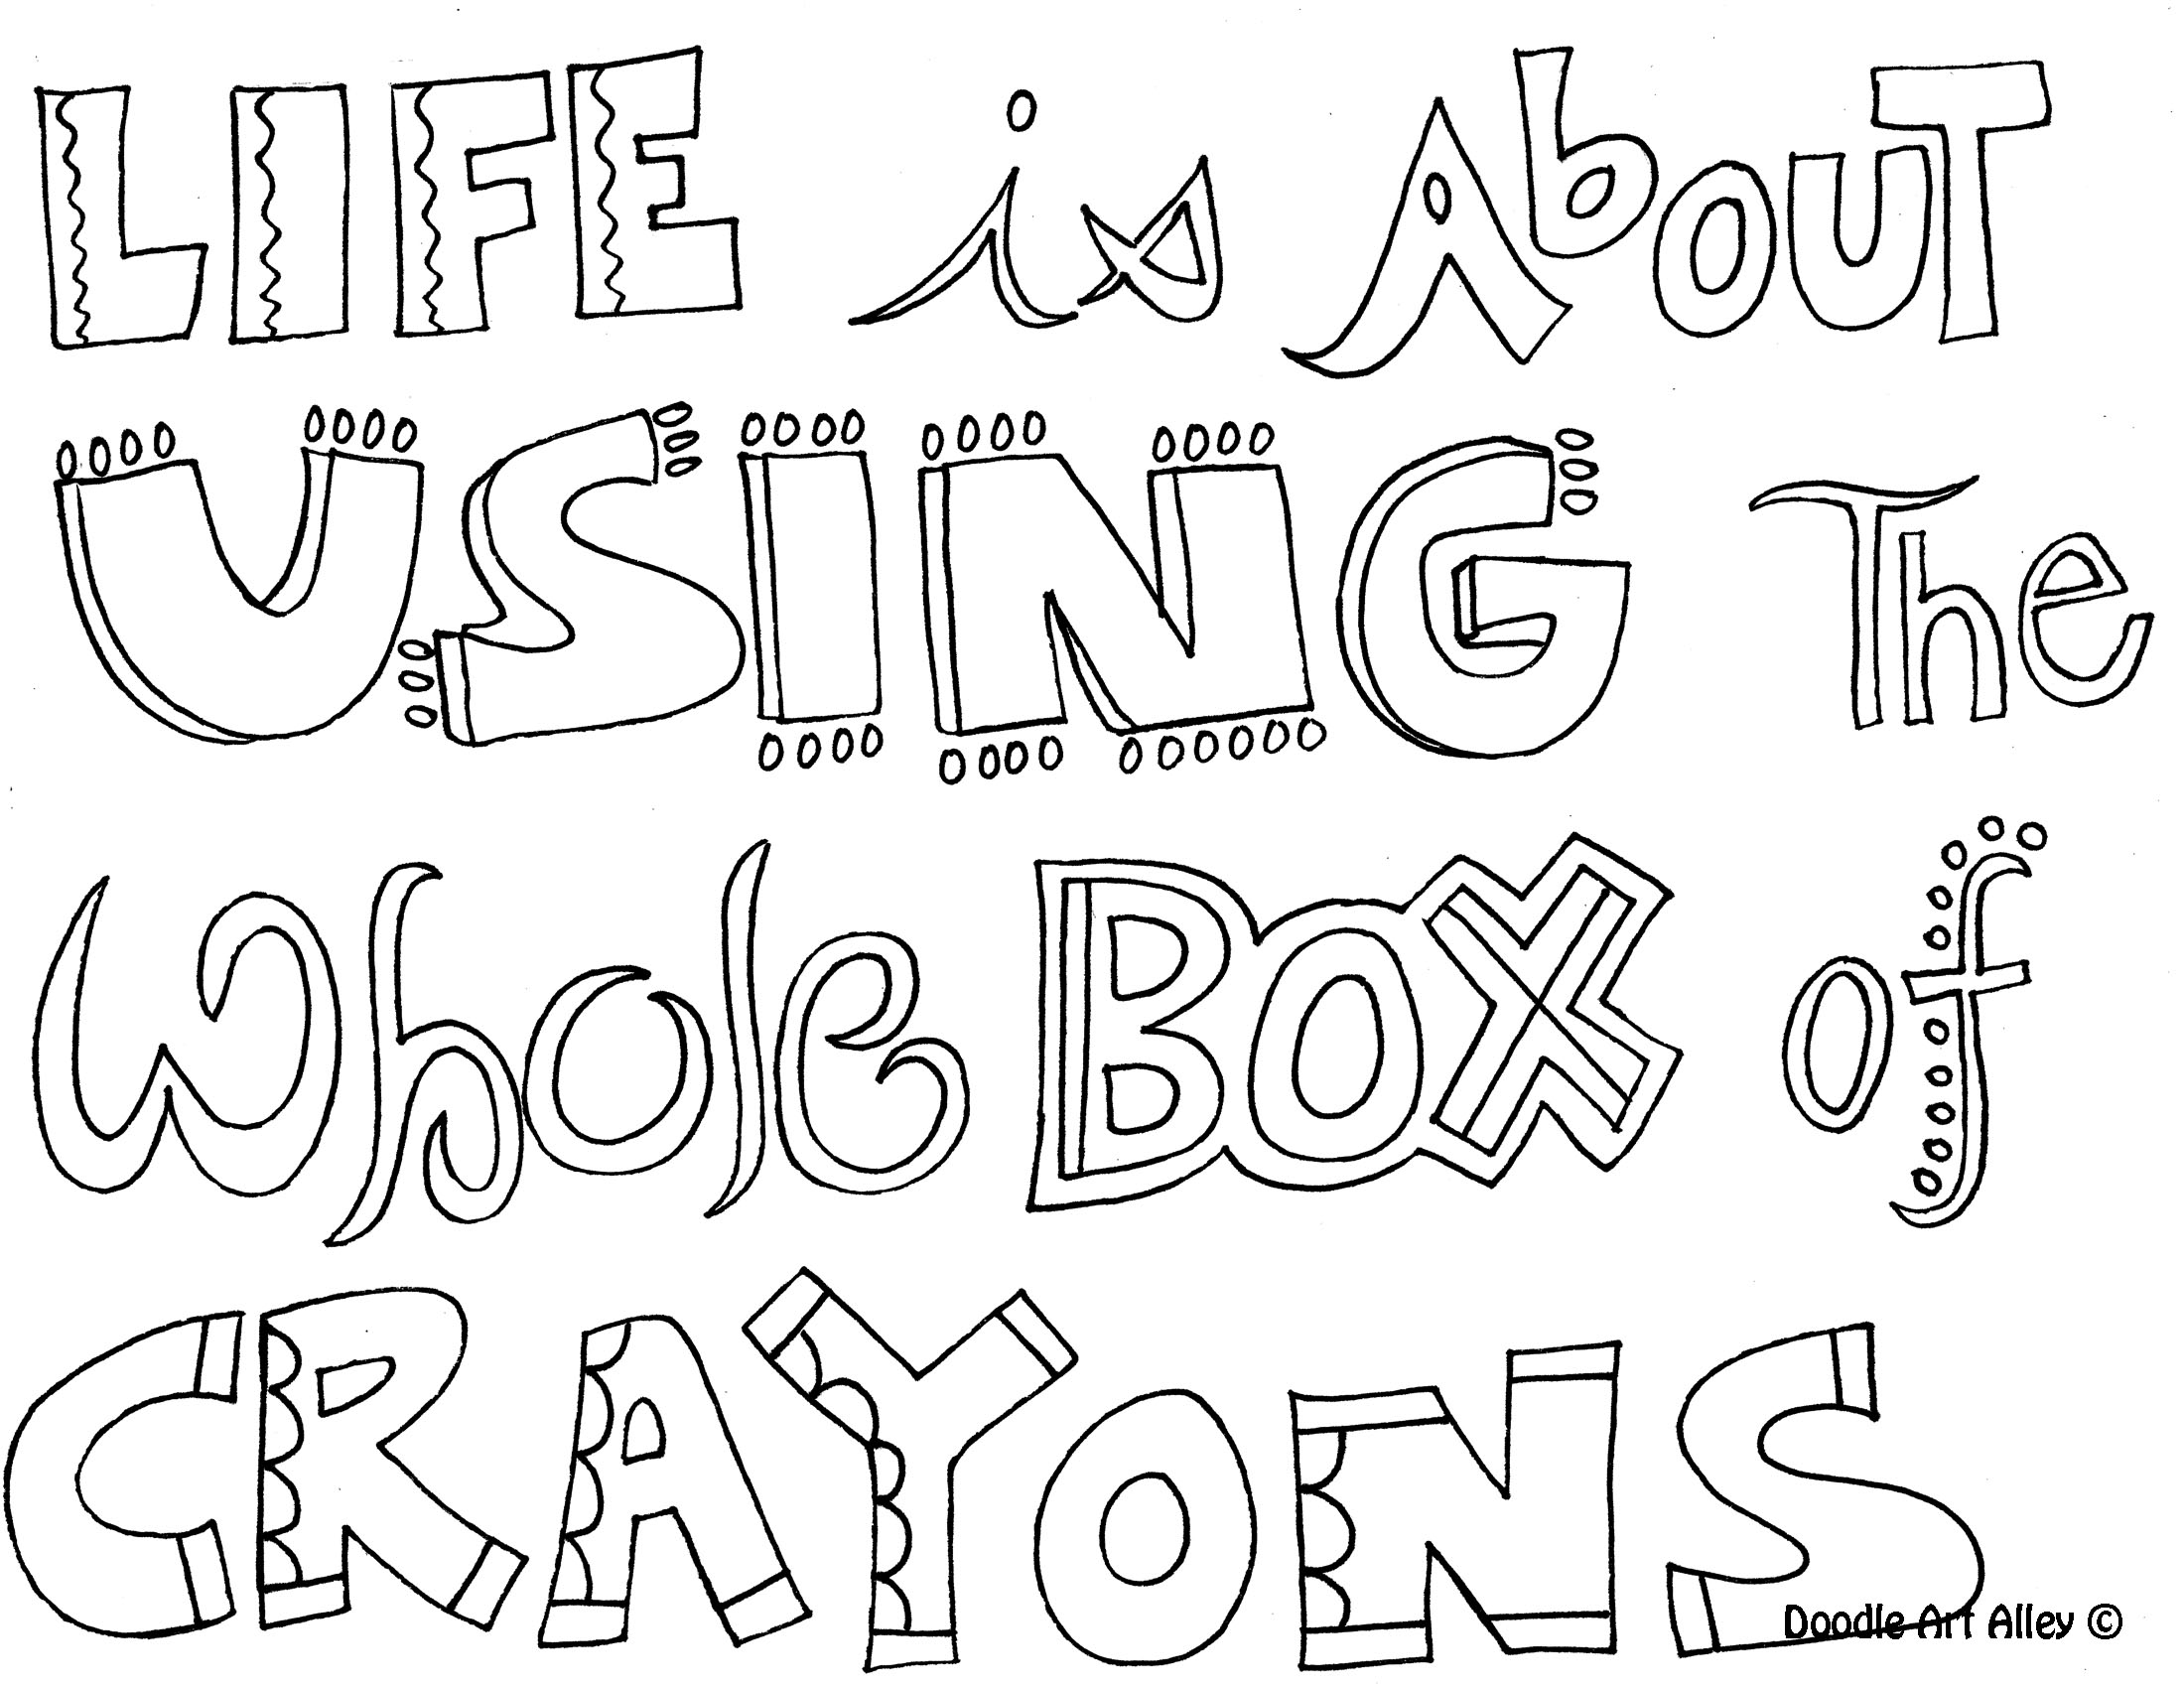 Quote Coloring Pages Printable Image